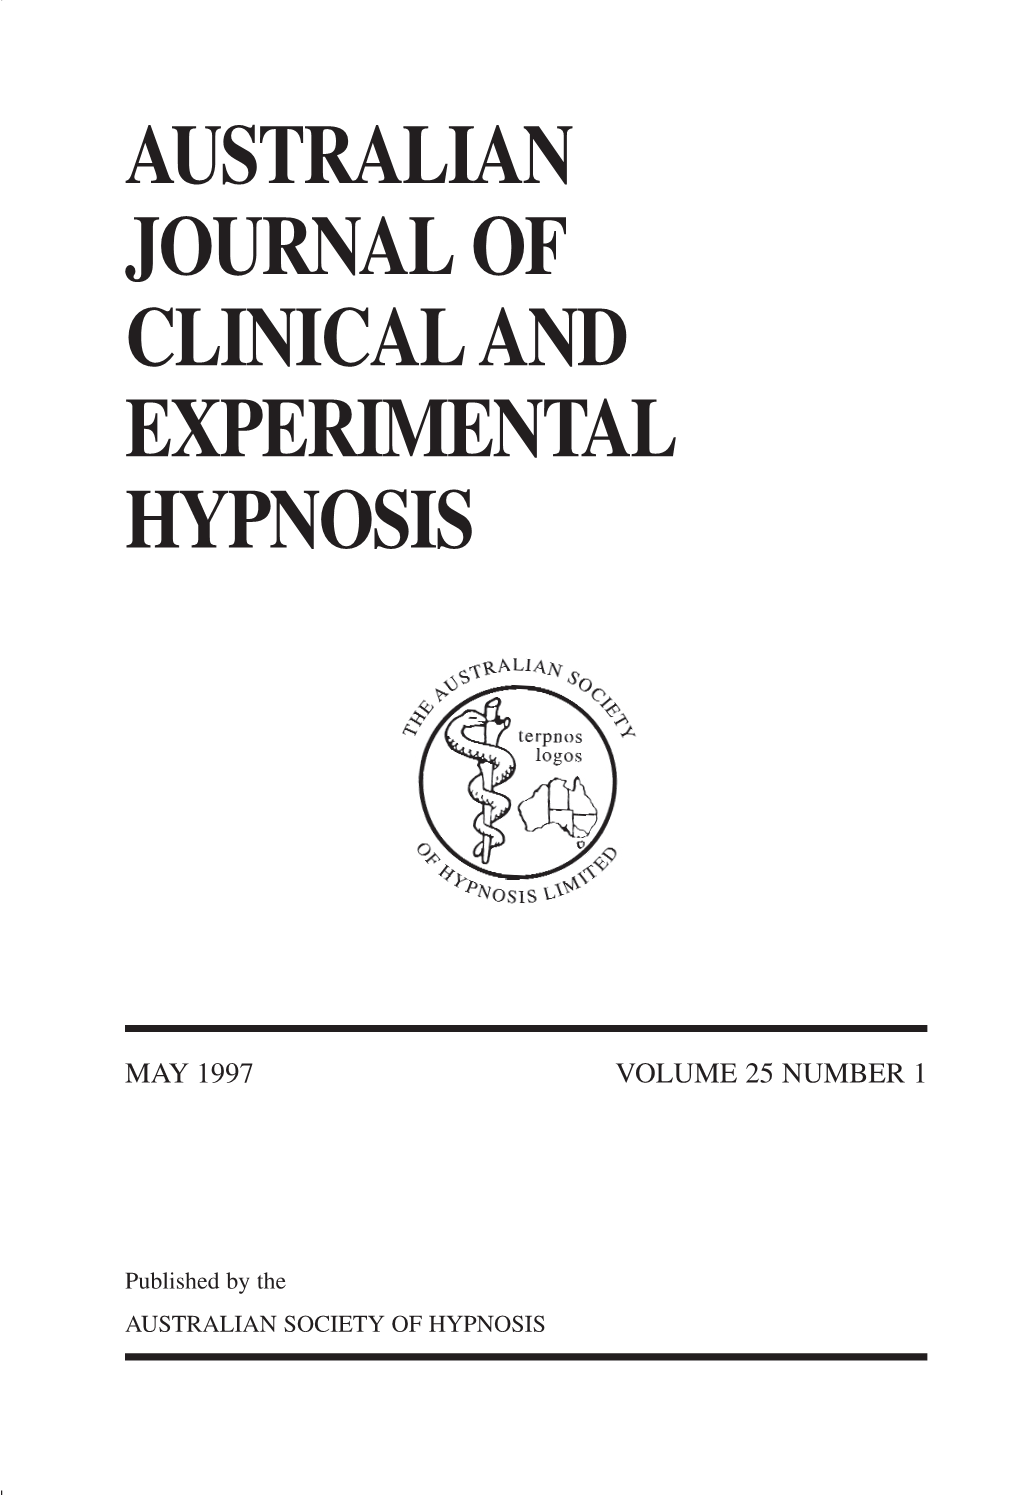 Australian Journal of Clinical and Experimental Hypnosis